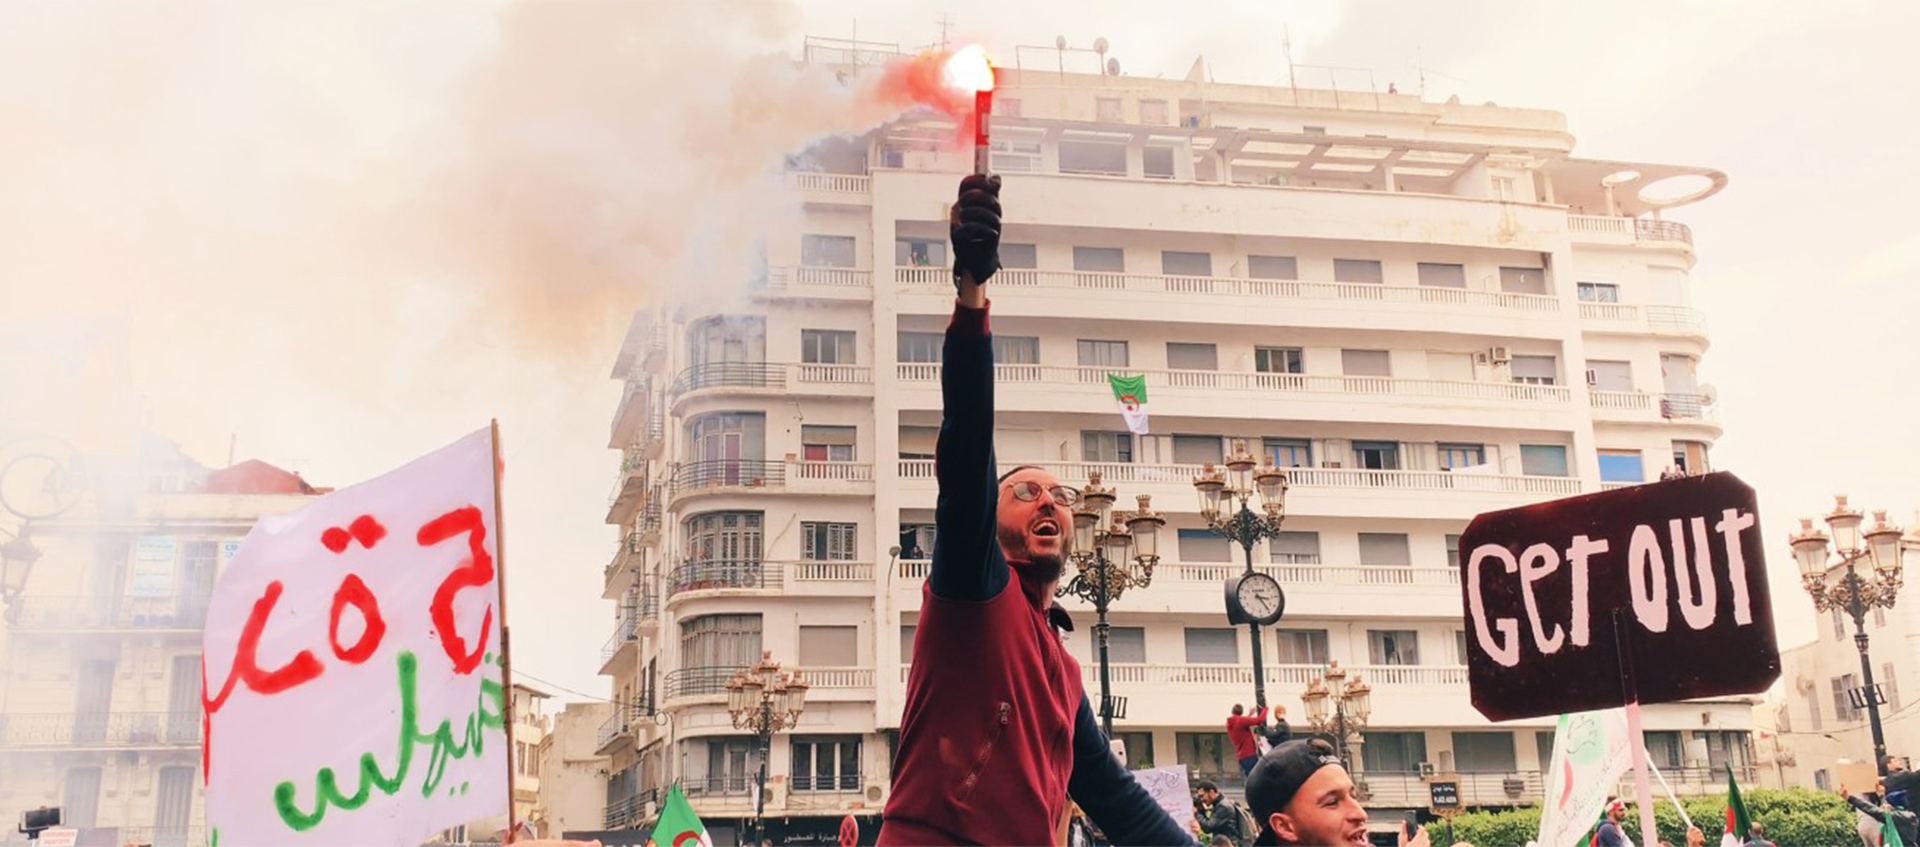 Man at protest standing in front of a building while he holds up a flare